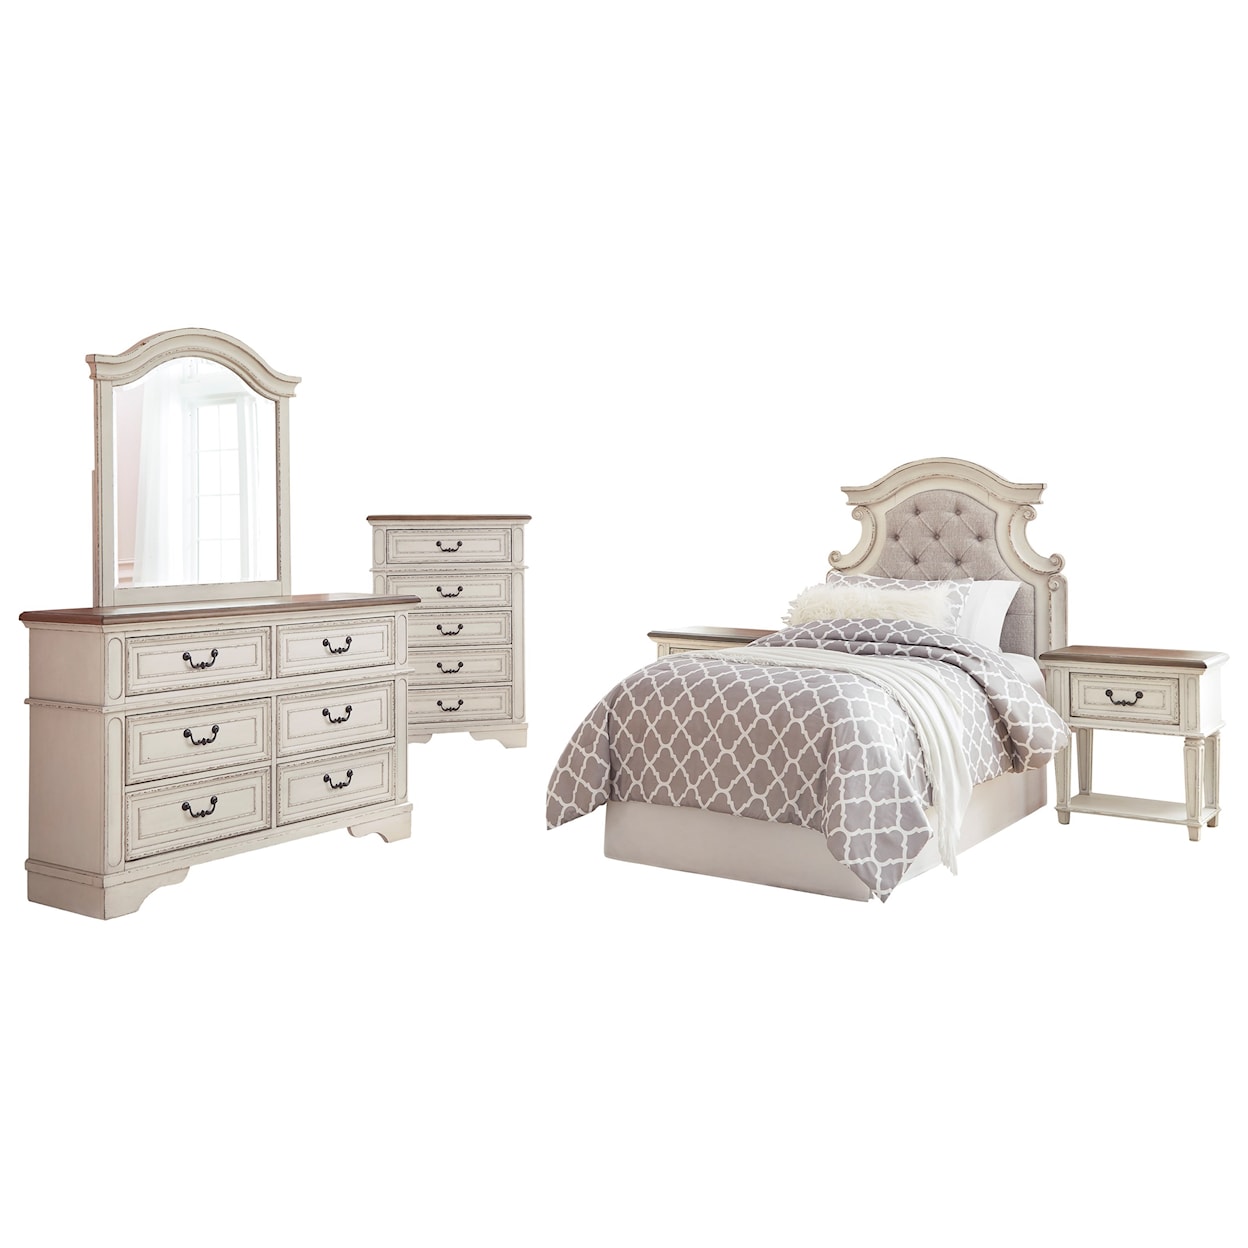 Signature Design by Ashley Furniture Realyn Twin Bedroom Group